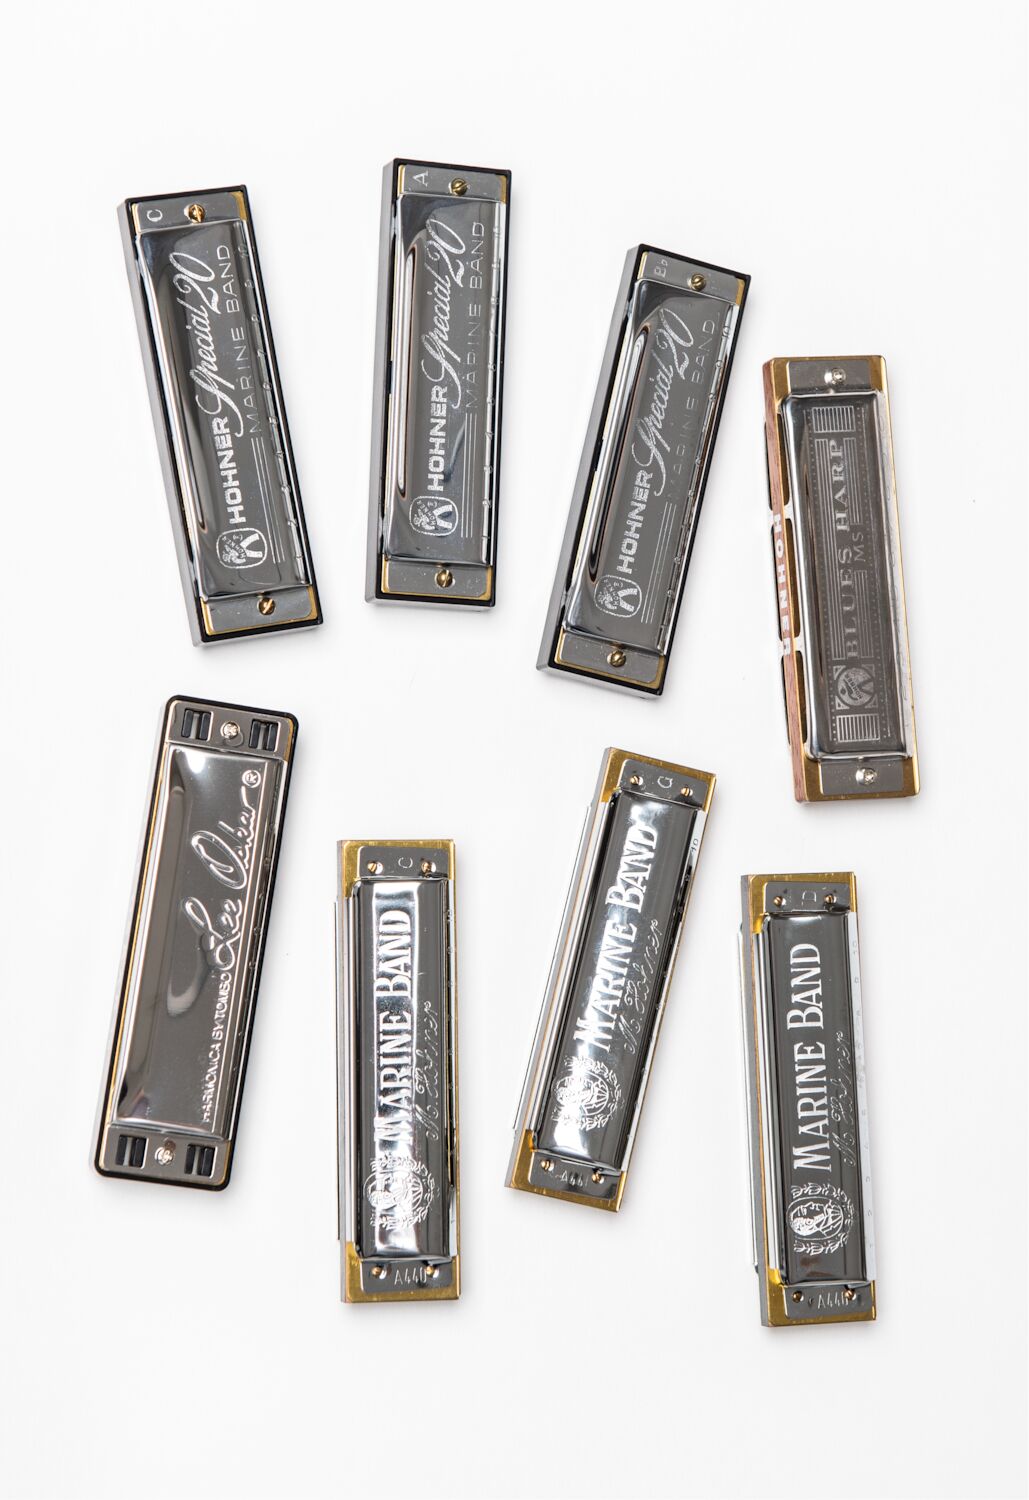 Eight bright metal harmonicas, from brands such as Marine Band and Hohner, that Steve collected.